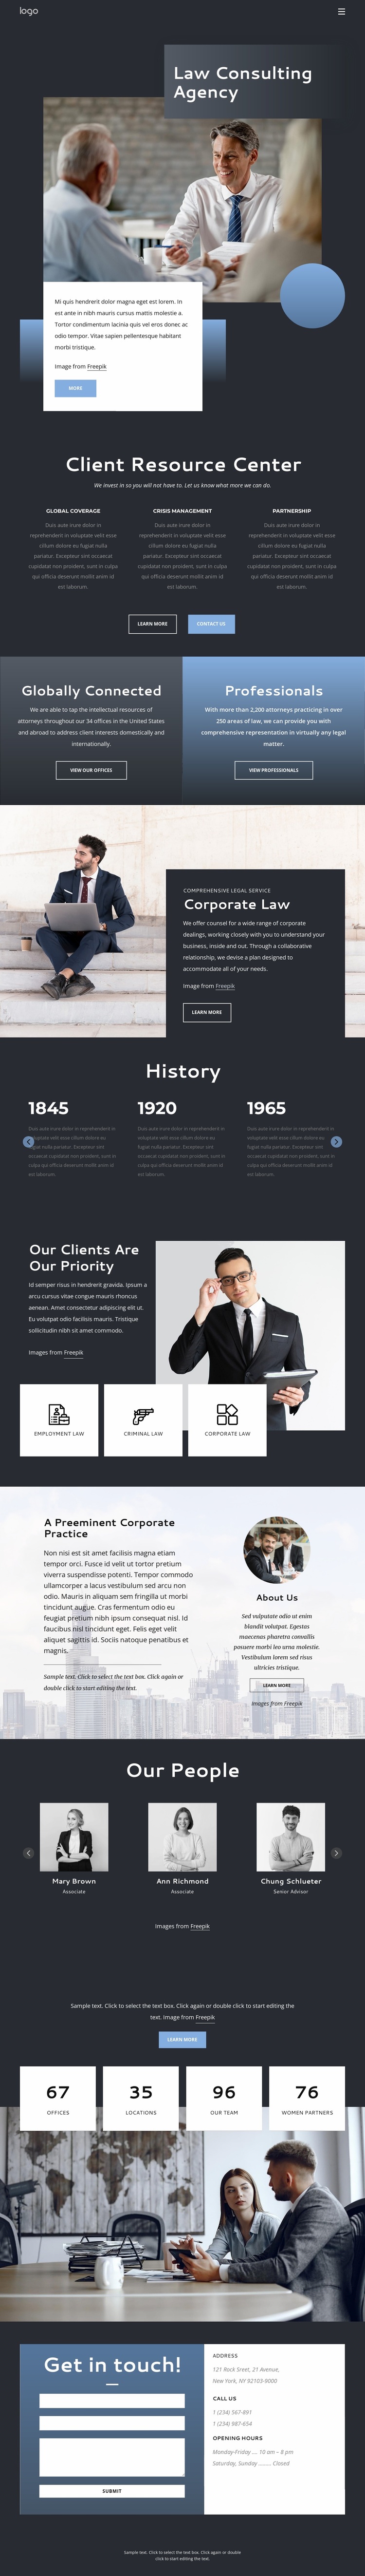 Law consulting agency Website Design